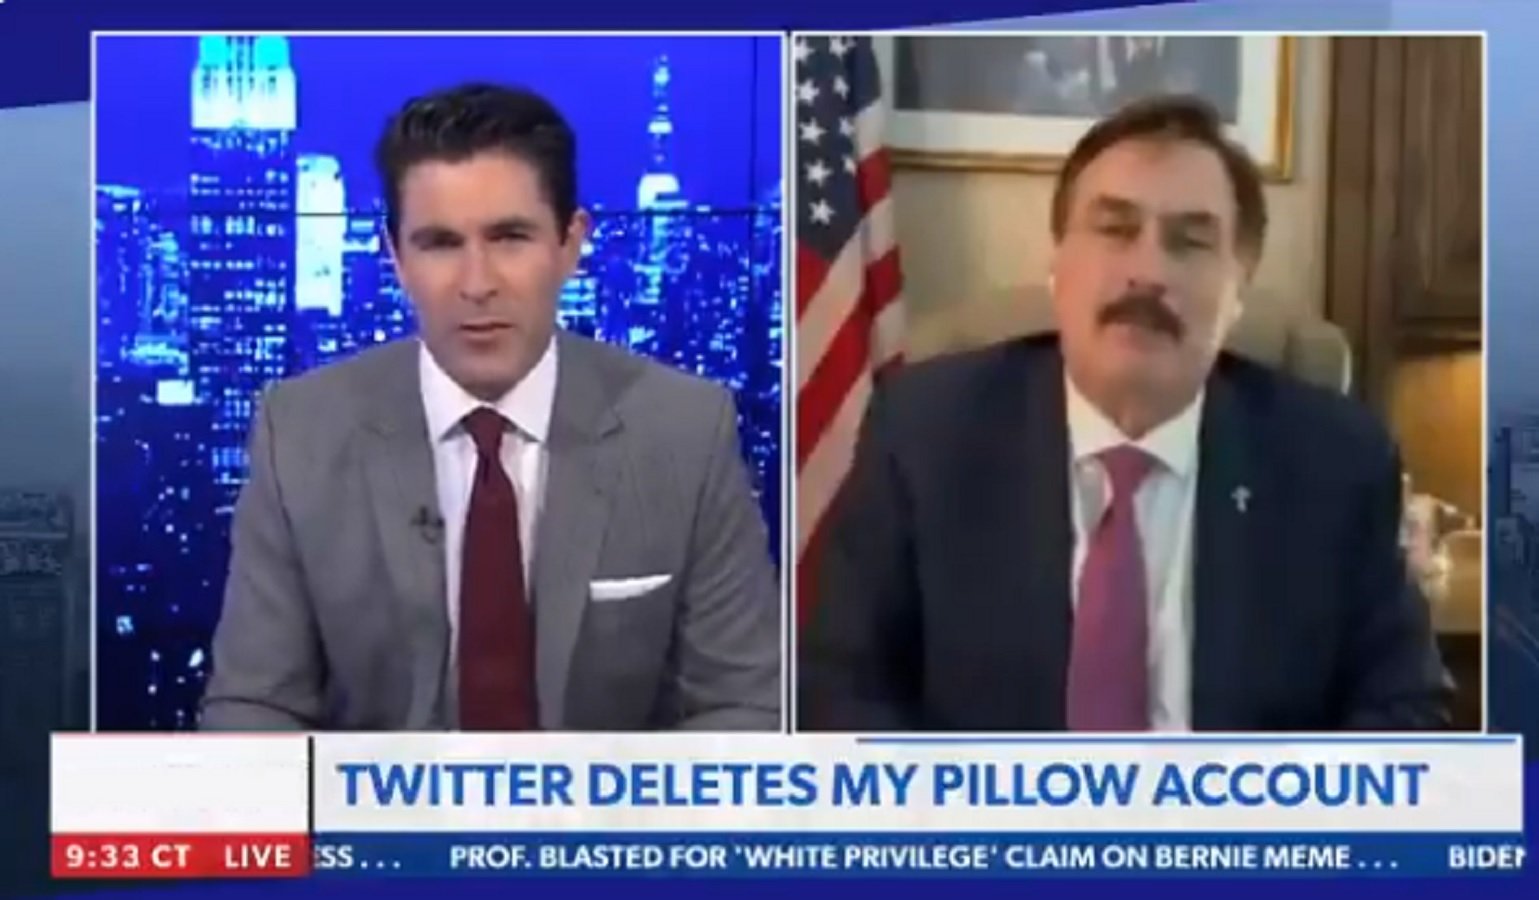 WATCH: Newsmax Brings My Pillow Founder Mike Lindell Back on After Hostile Segment - Lindell Announces Video Release on Friday